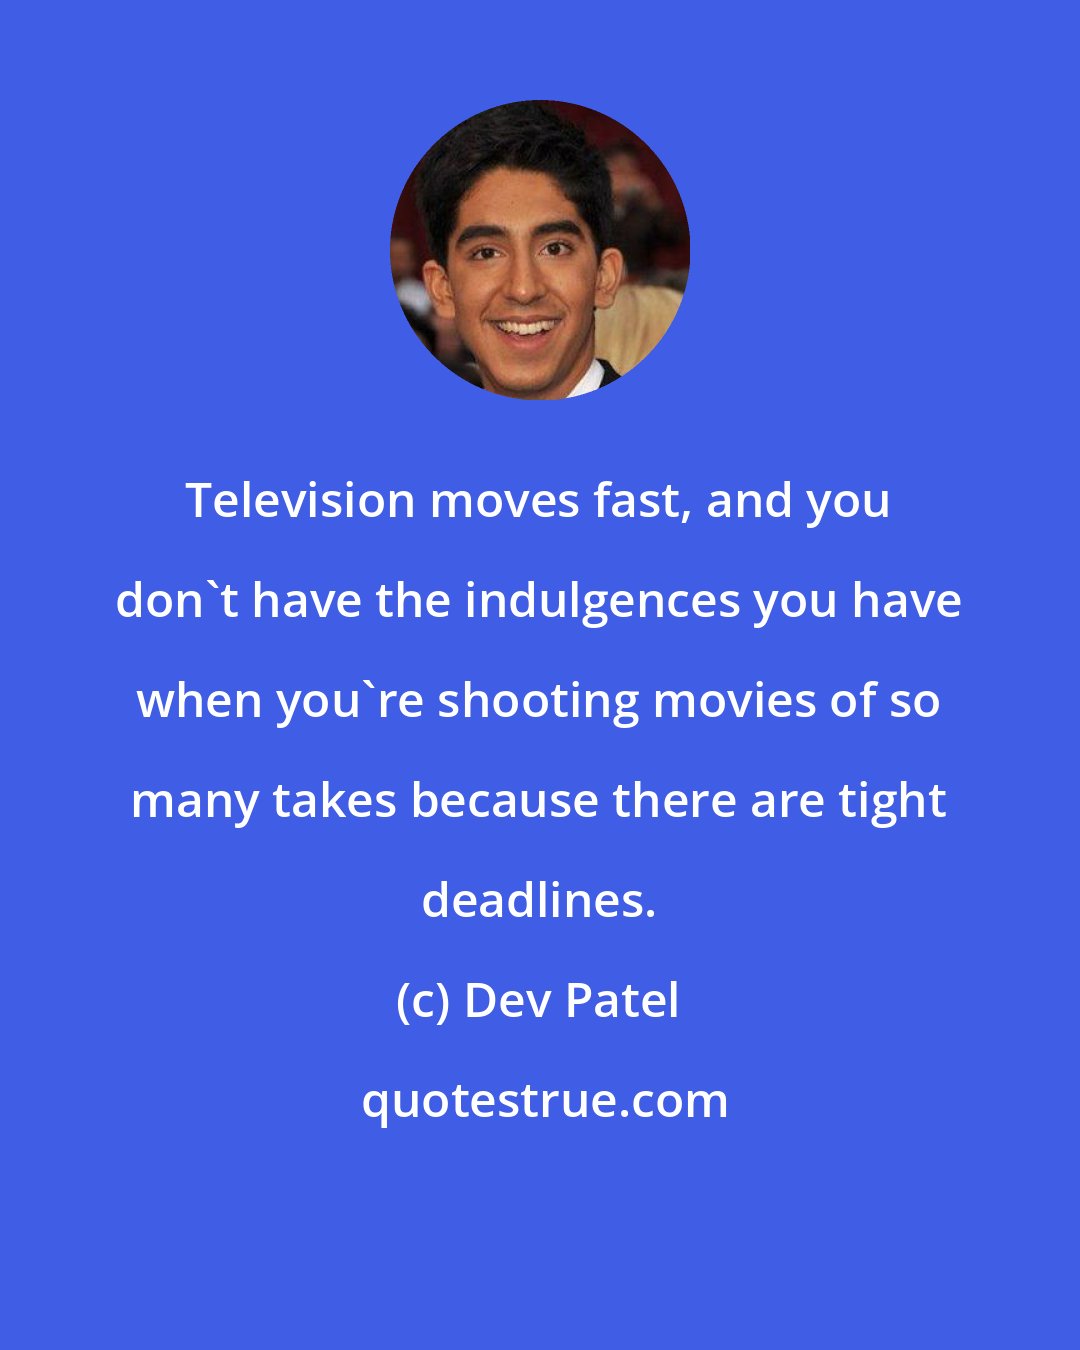 Dev Patel: Television moves fast, and you don't have the indulgences you have when you're shooting movies of so many takes because there are tight deadlines.